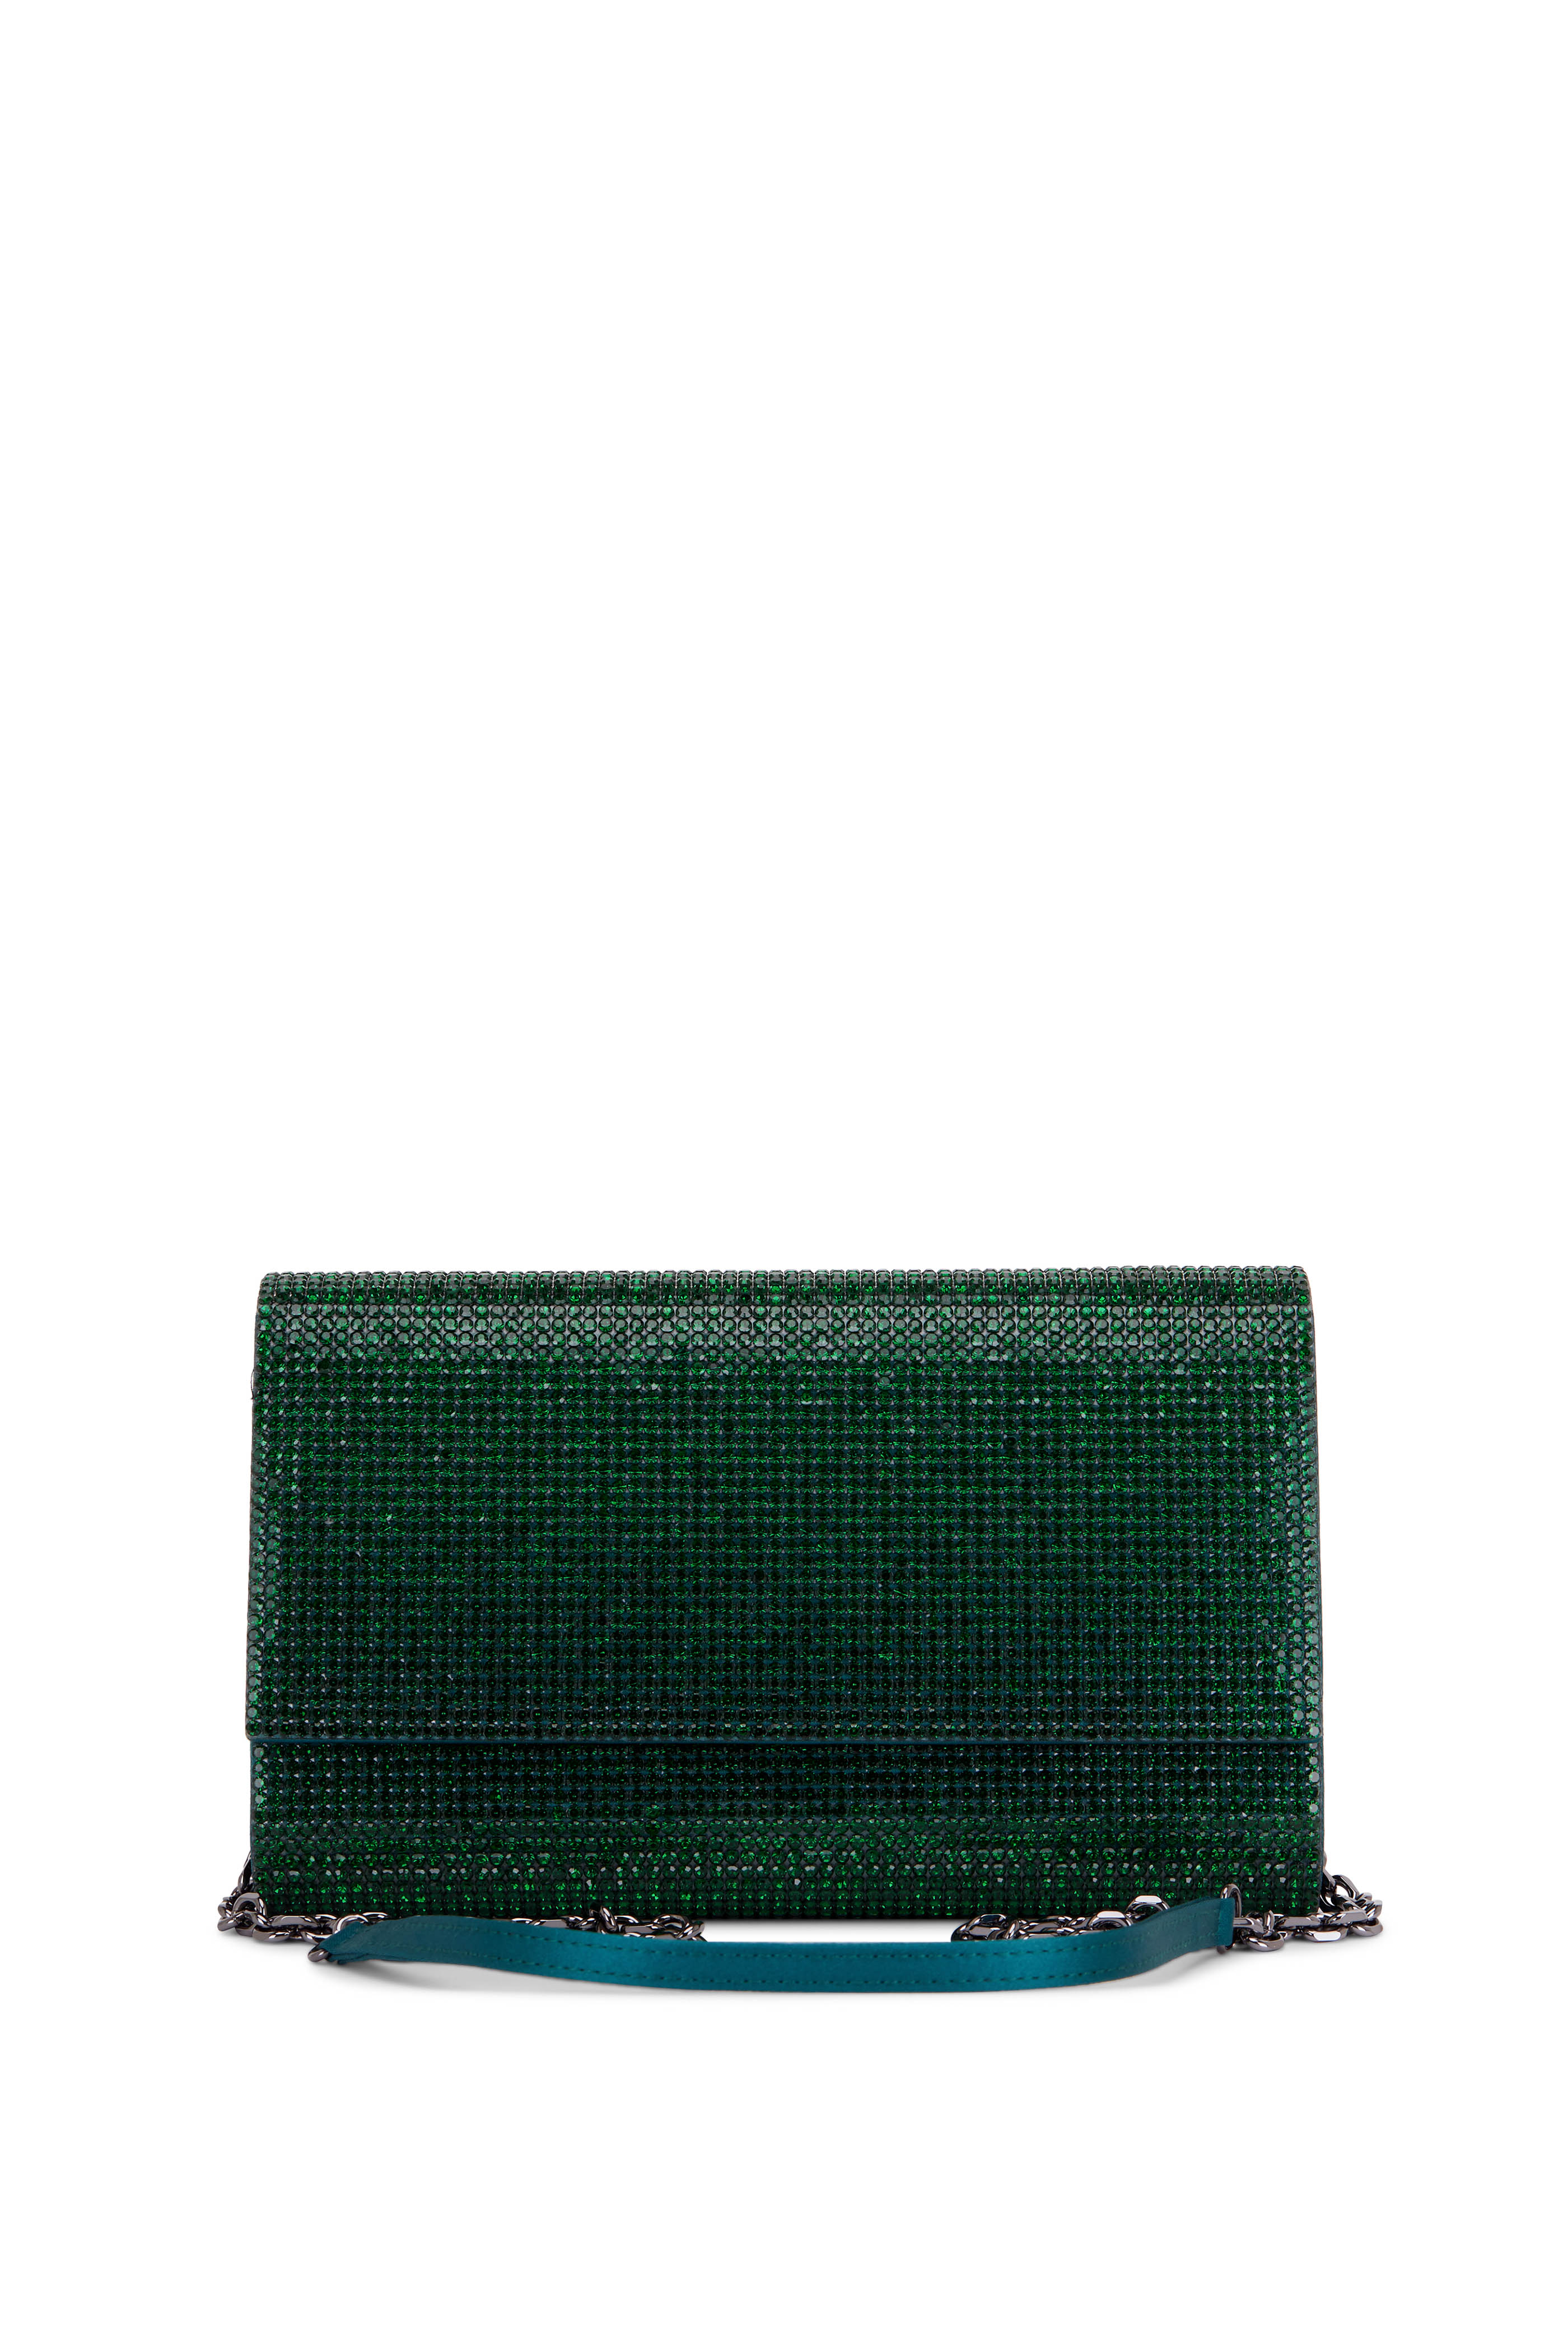 Judith Leiber Couture Beaded Envelope Clutch in Nero Jet